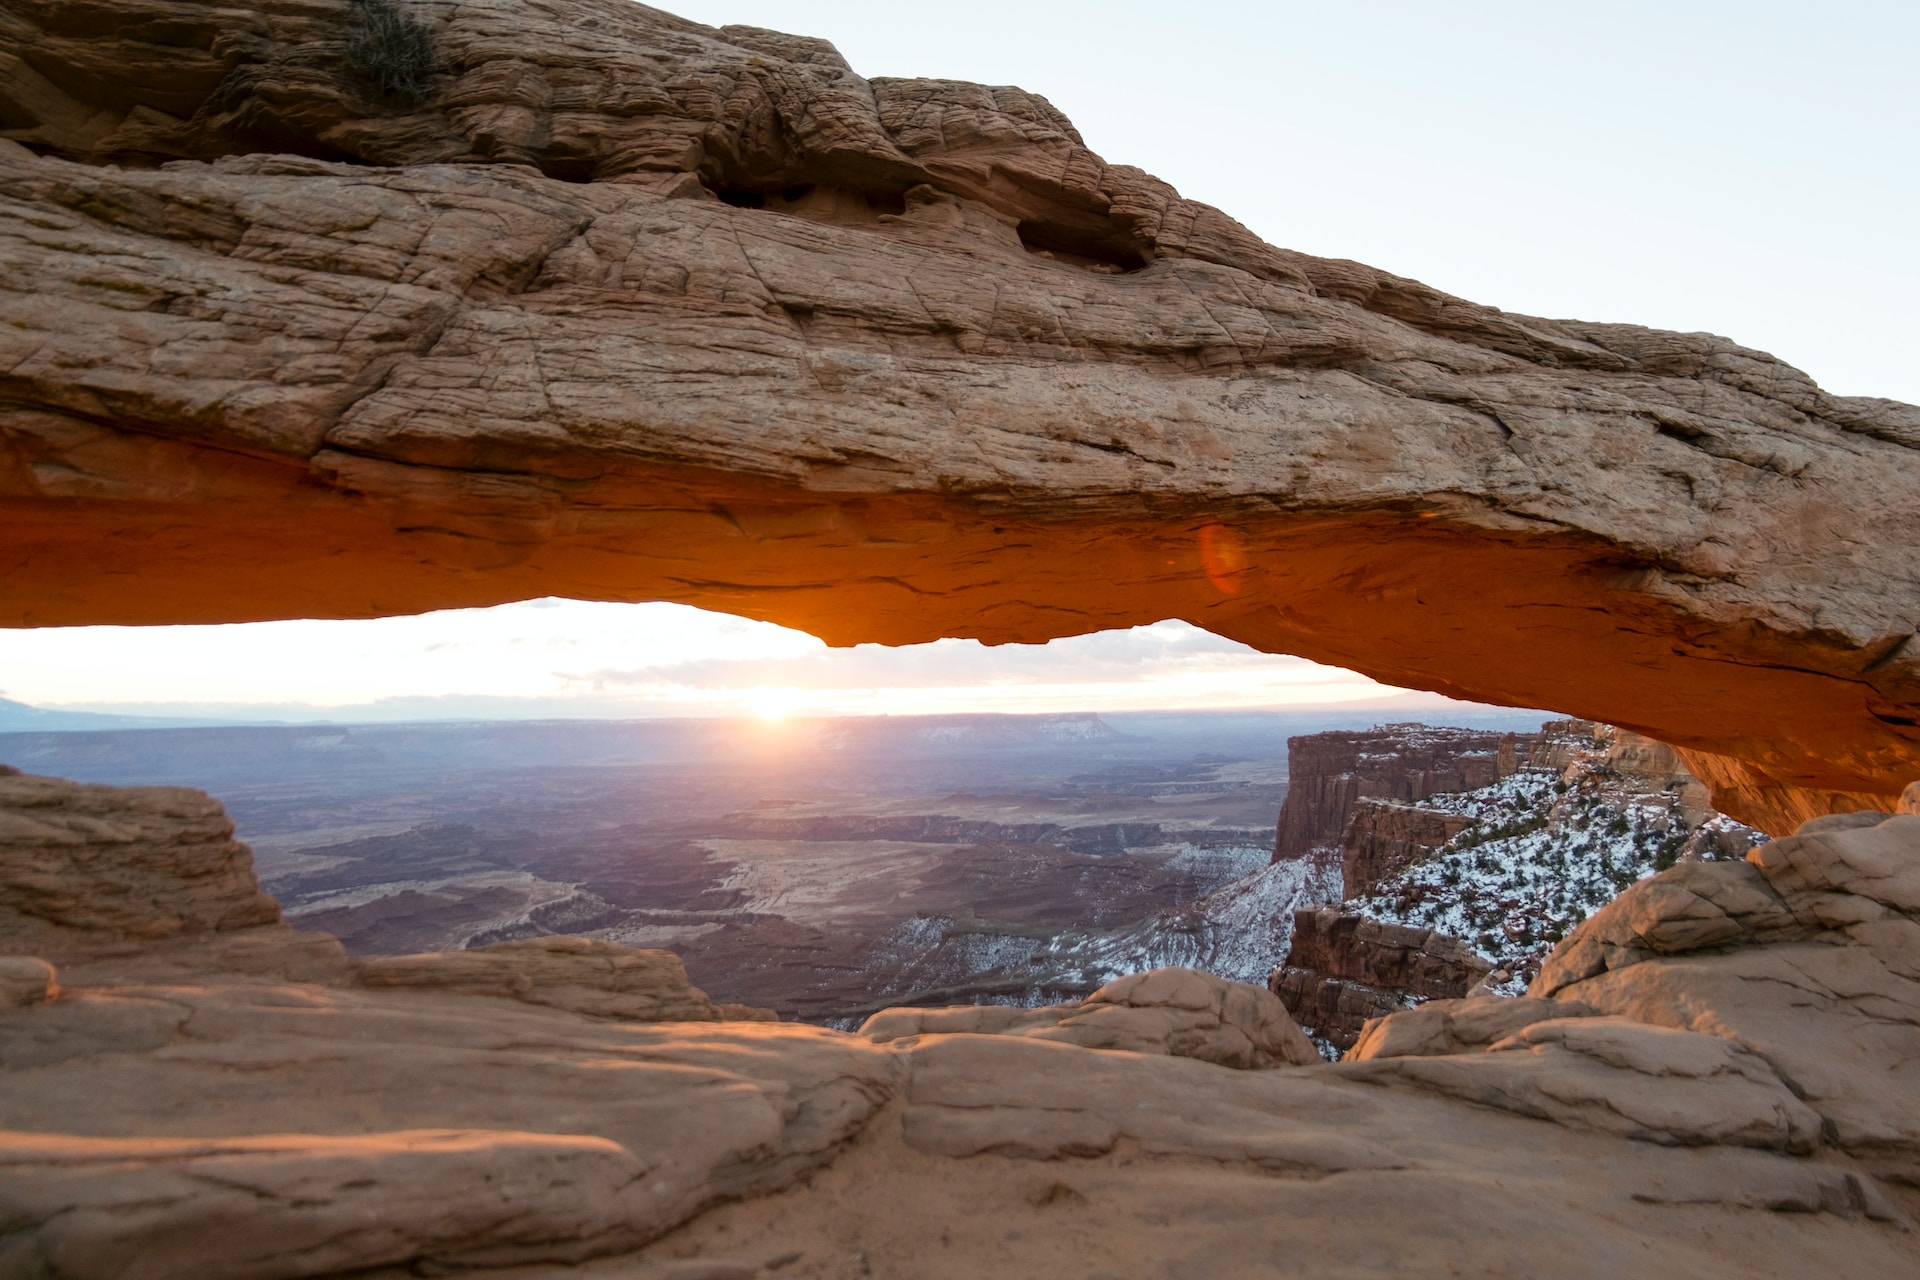 An iconic arch in the Canyonlands.